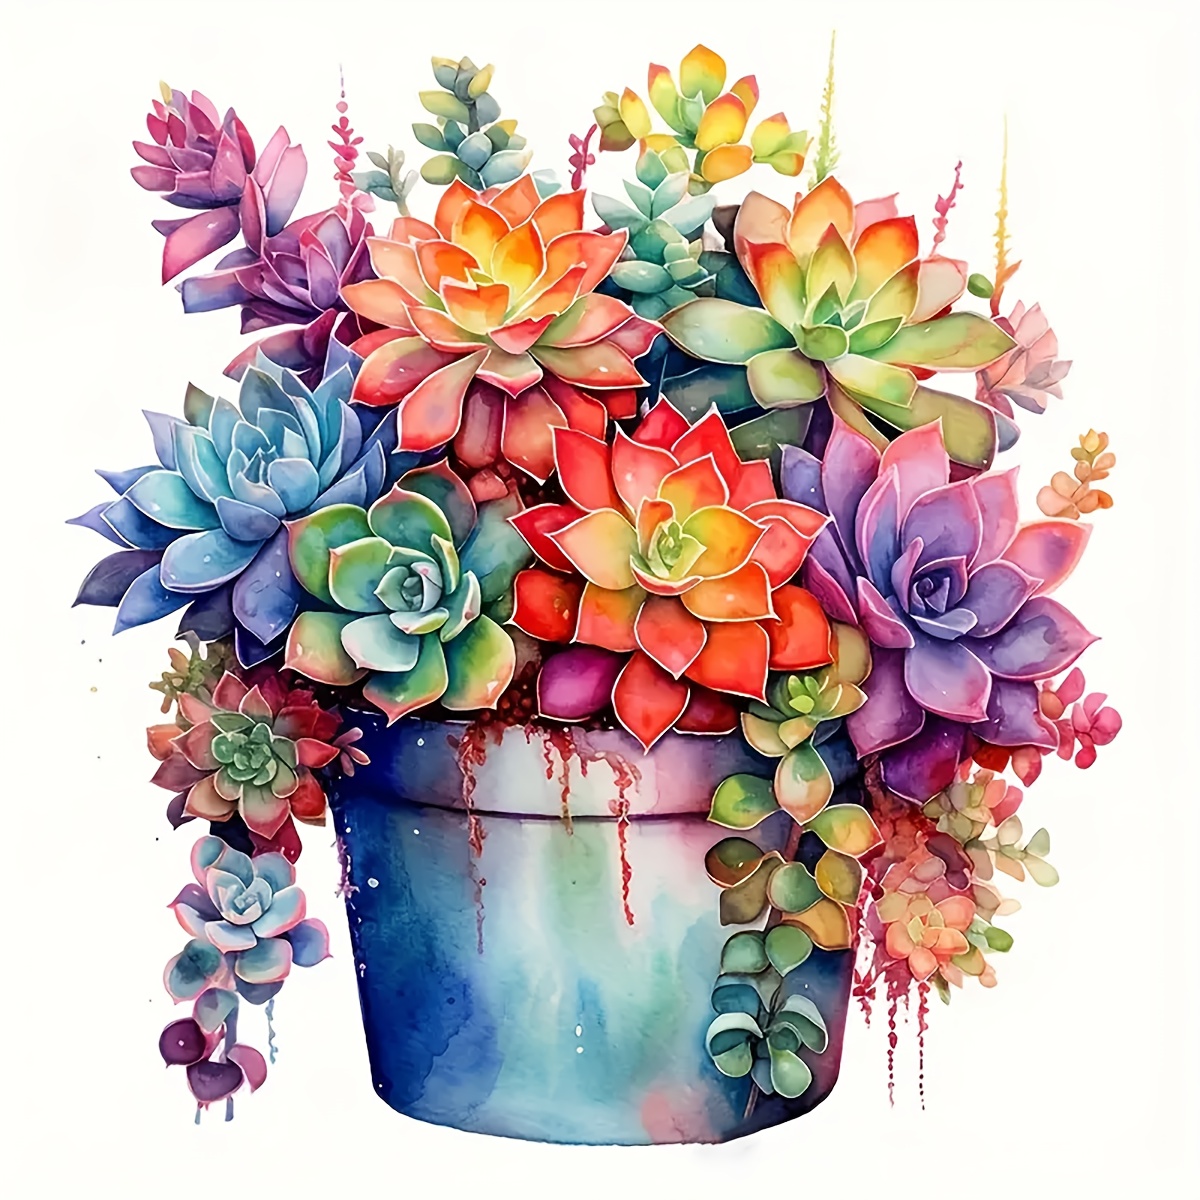 

Colorful Succulents Diy 5d Round Full Diamond Painting Kit, 25x25cm Acrylic (pmma), Flower Theme Handcraft Surprise Gift